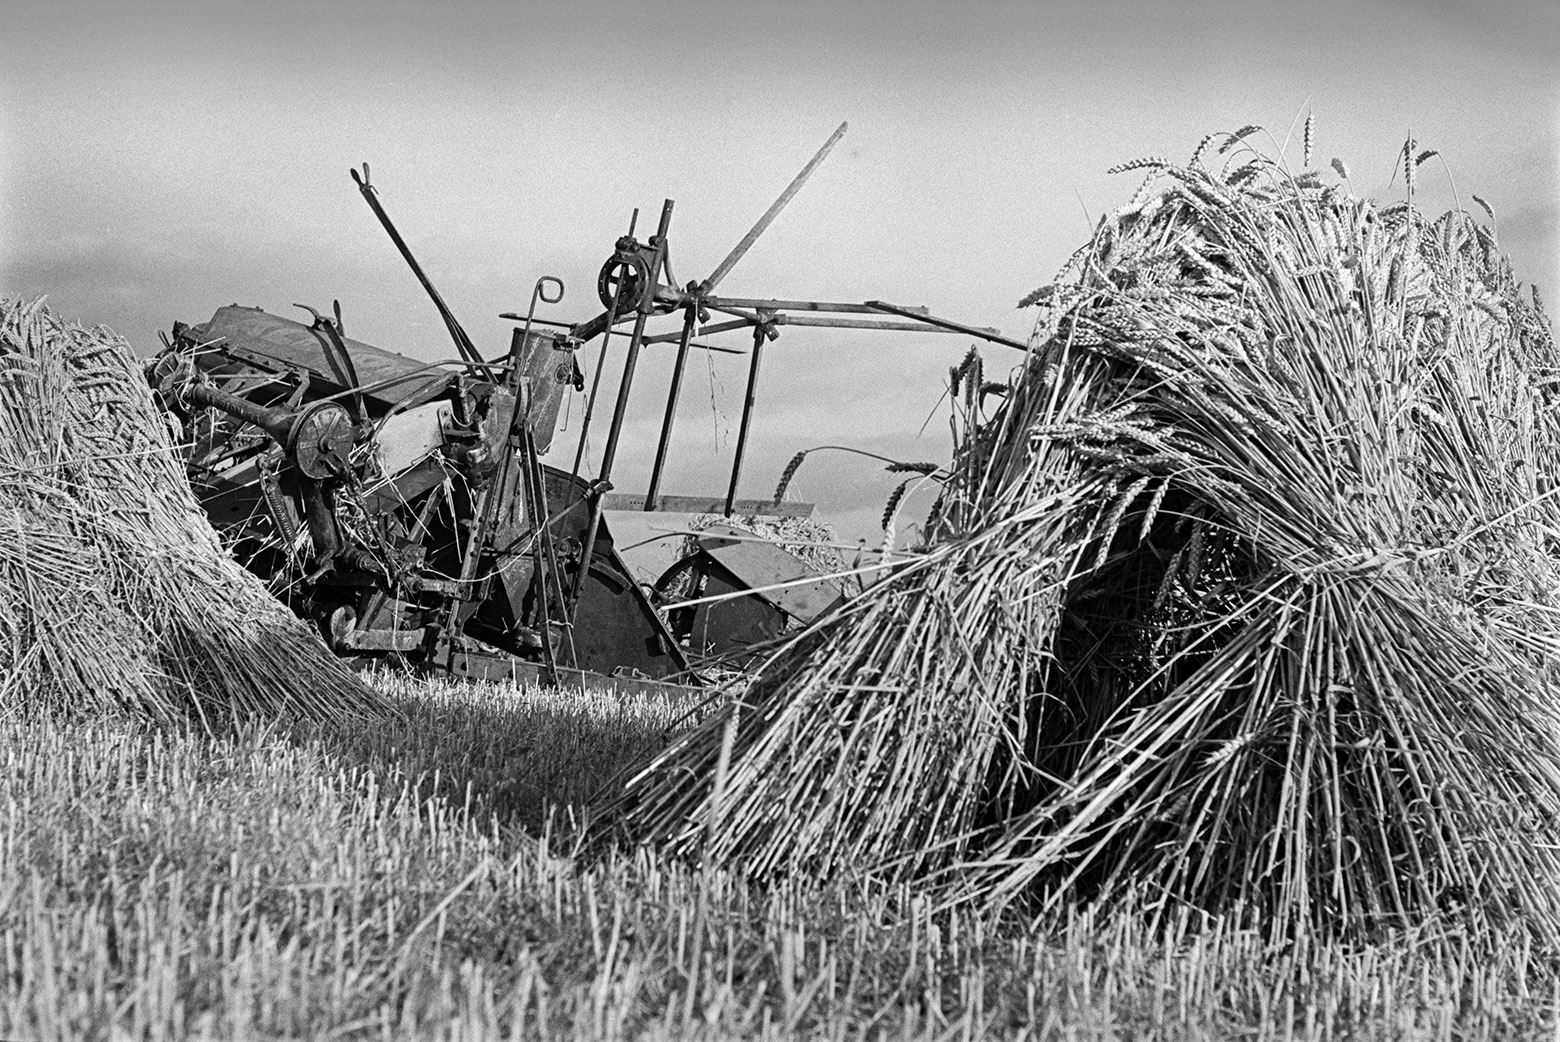 Stooks of corn or wheat in a field at Mill Road Farm, Beaford, with part of an old farm machine, possibly a winnowing machine, visible in the background. The farm was also known as Jeffrys.